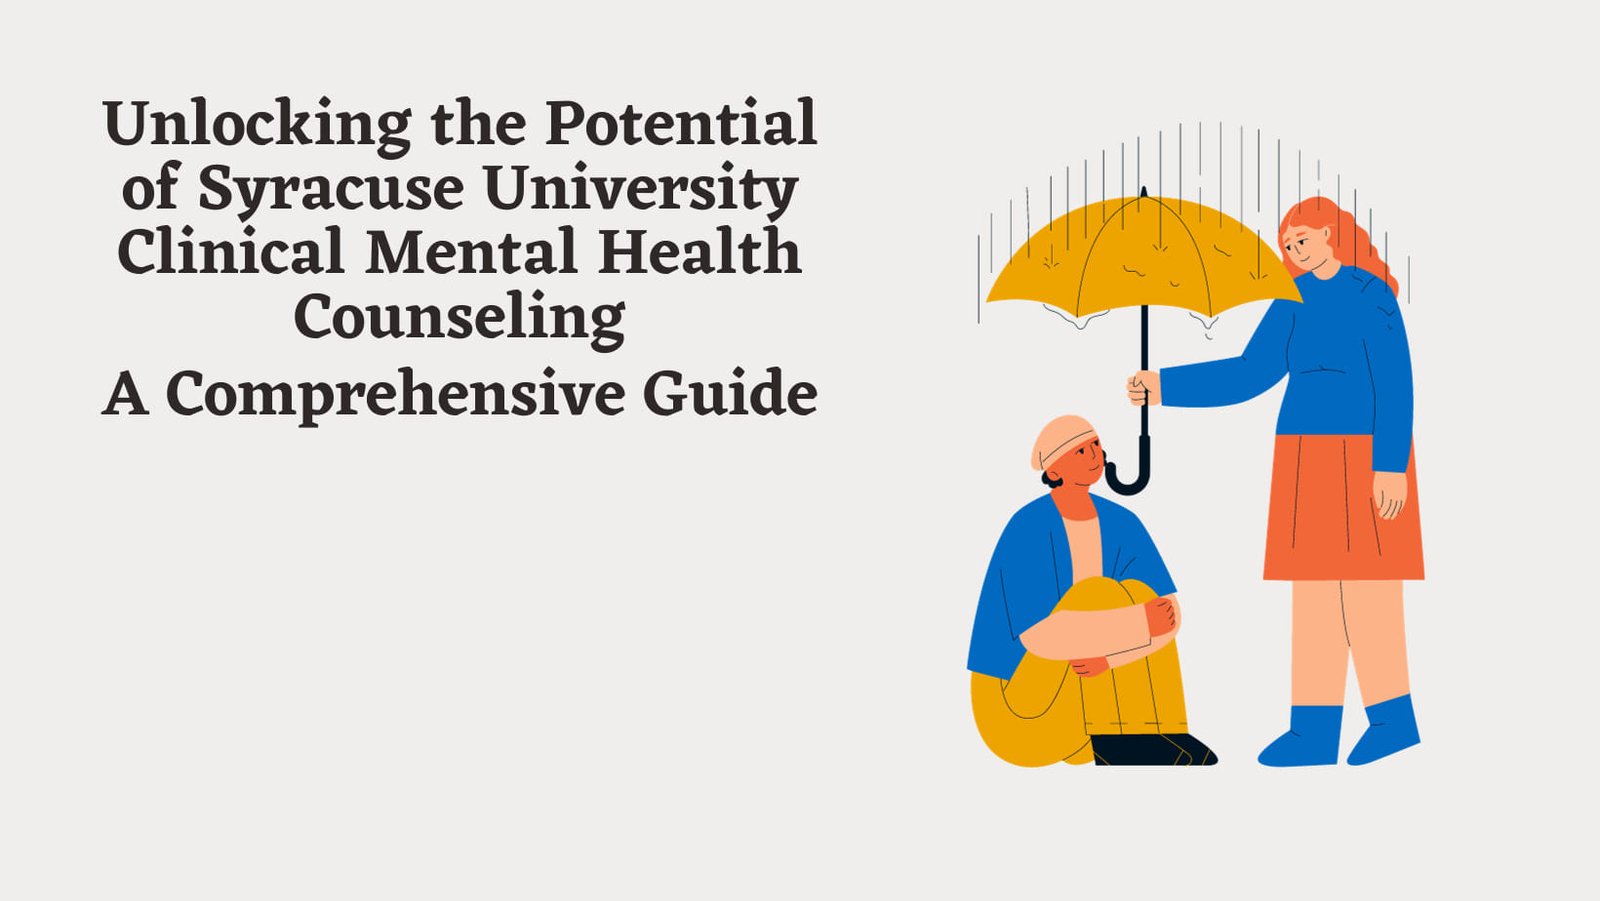 syracuse university clinical mental health counseling